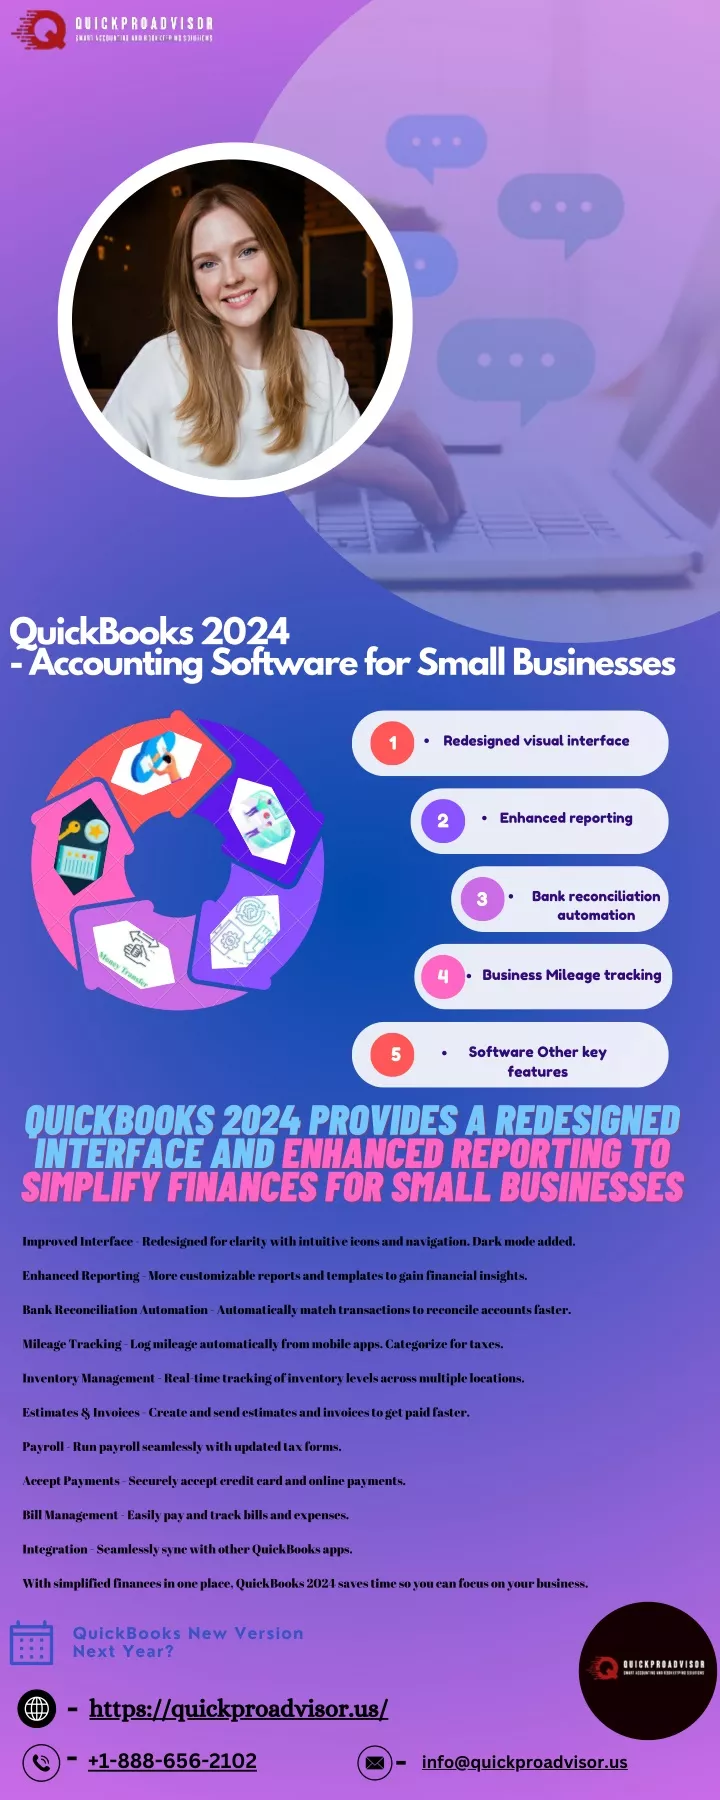 quickbooks 2024 accounting software for small